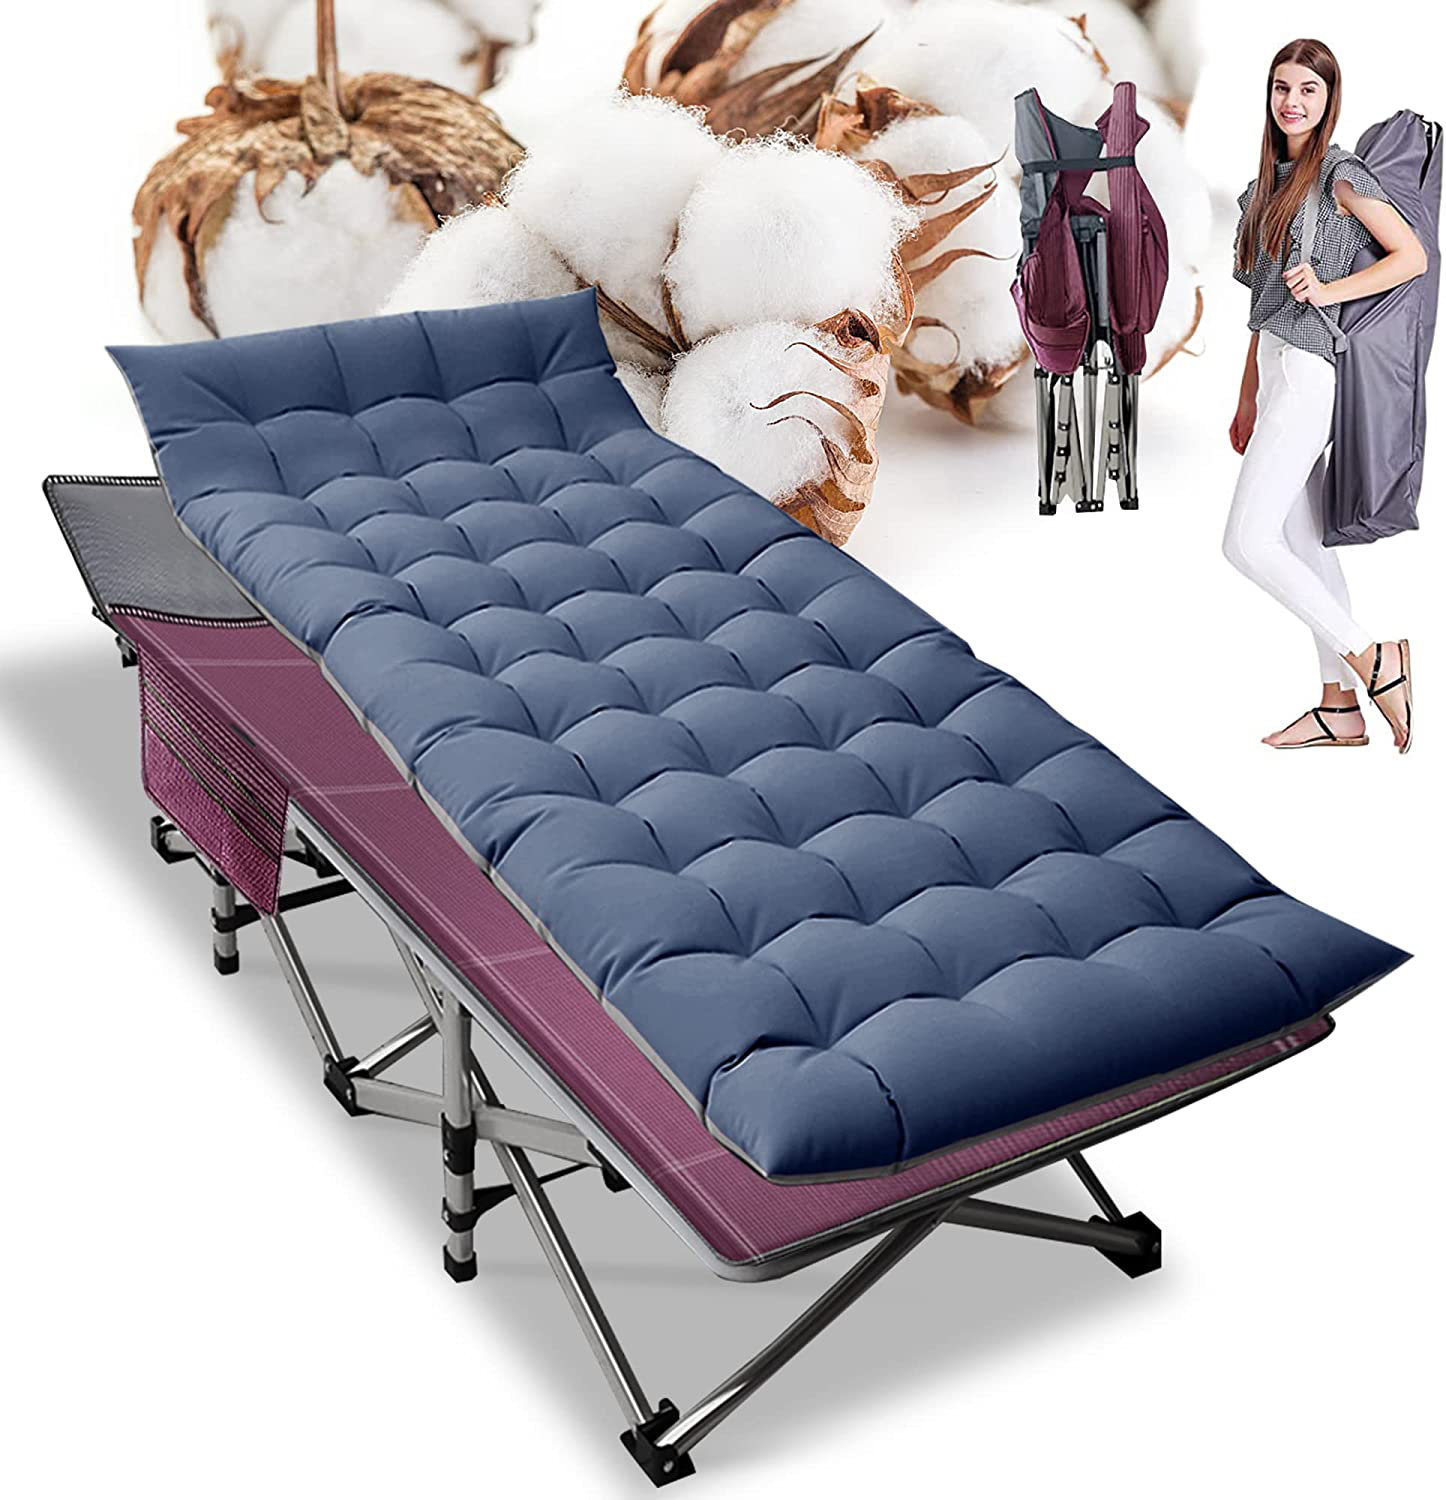 LEISUIT Rollaway Guest Bed Cot Fold Out - Portable 75 x 31 x 14inch